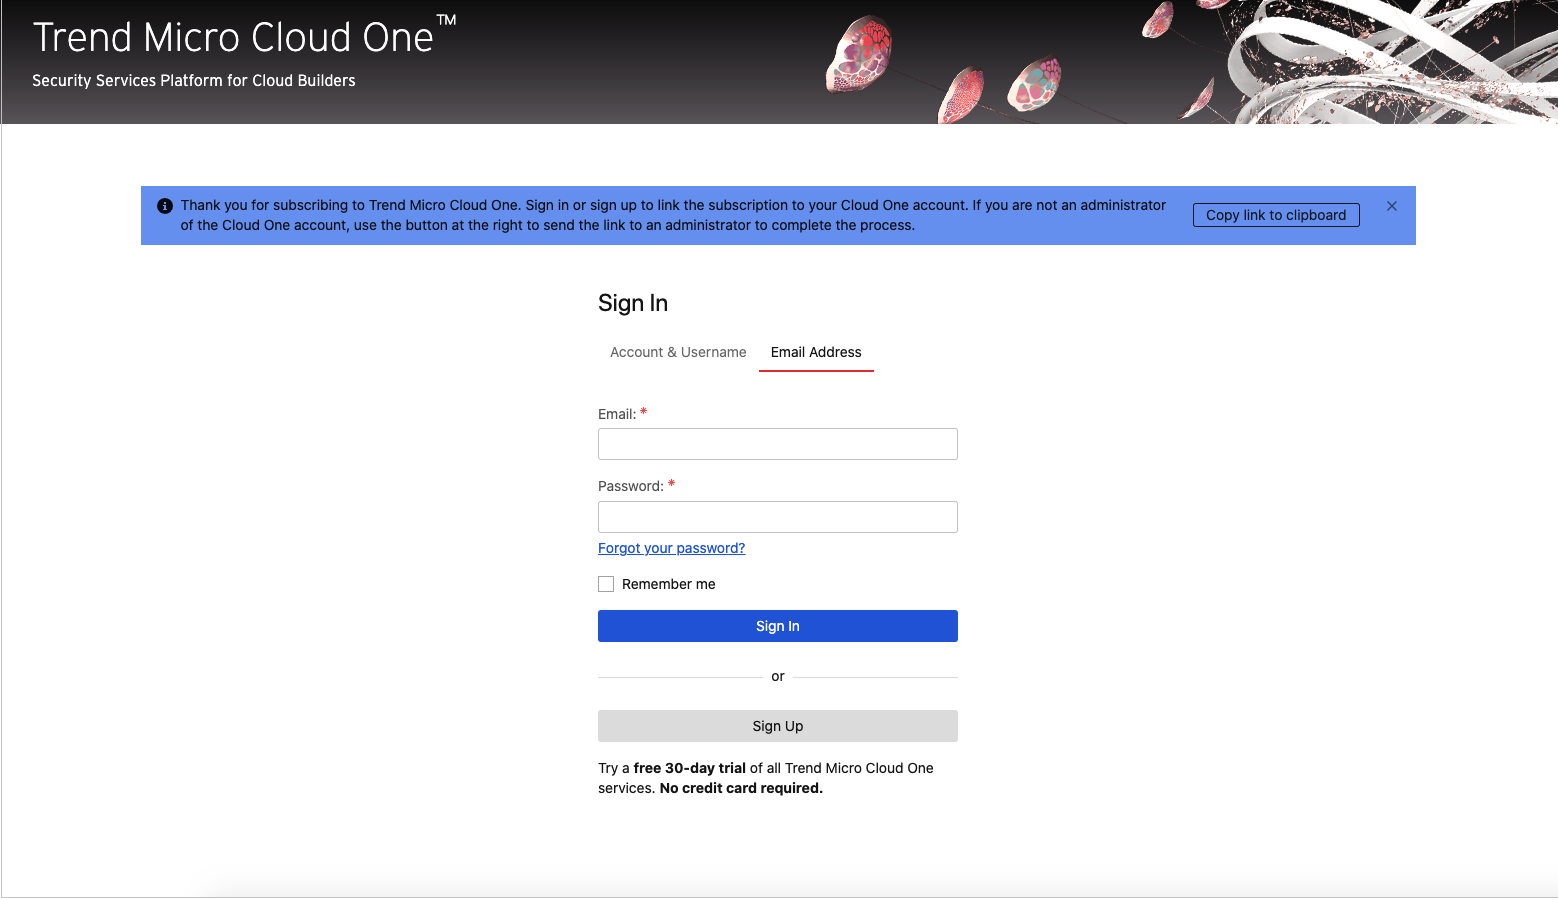 Trend Micro Cloud One Sign In page